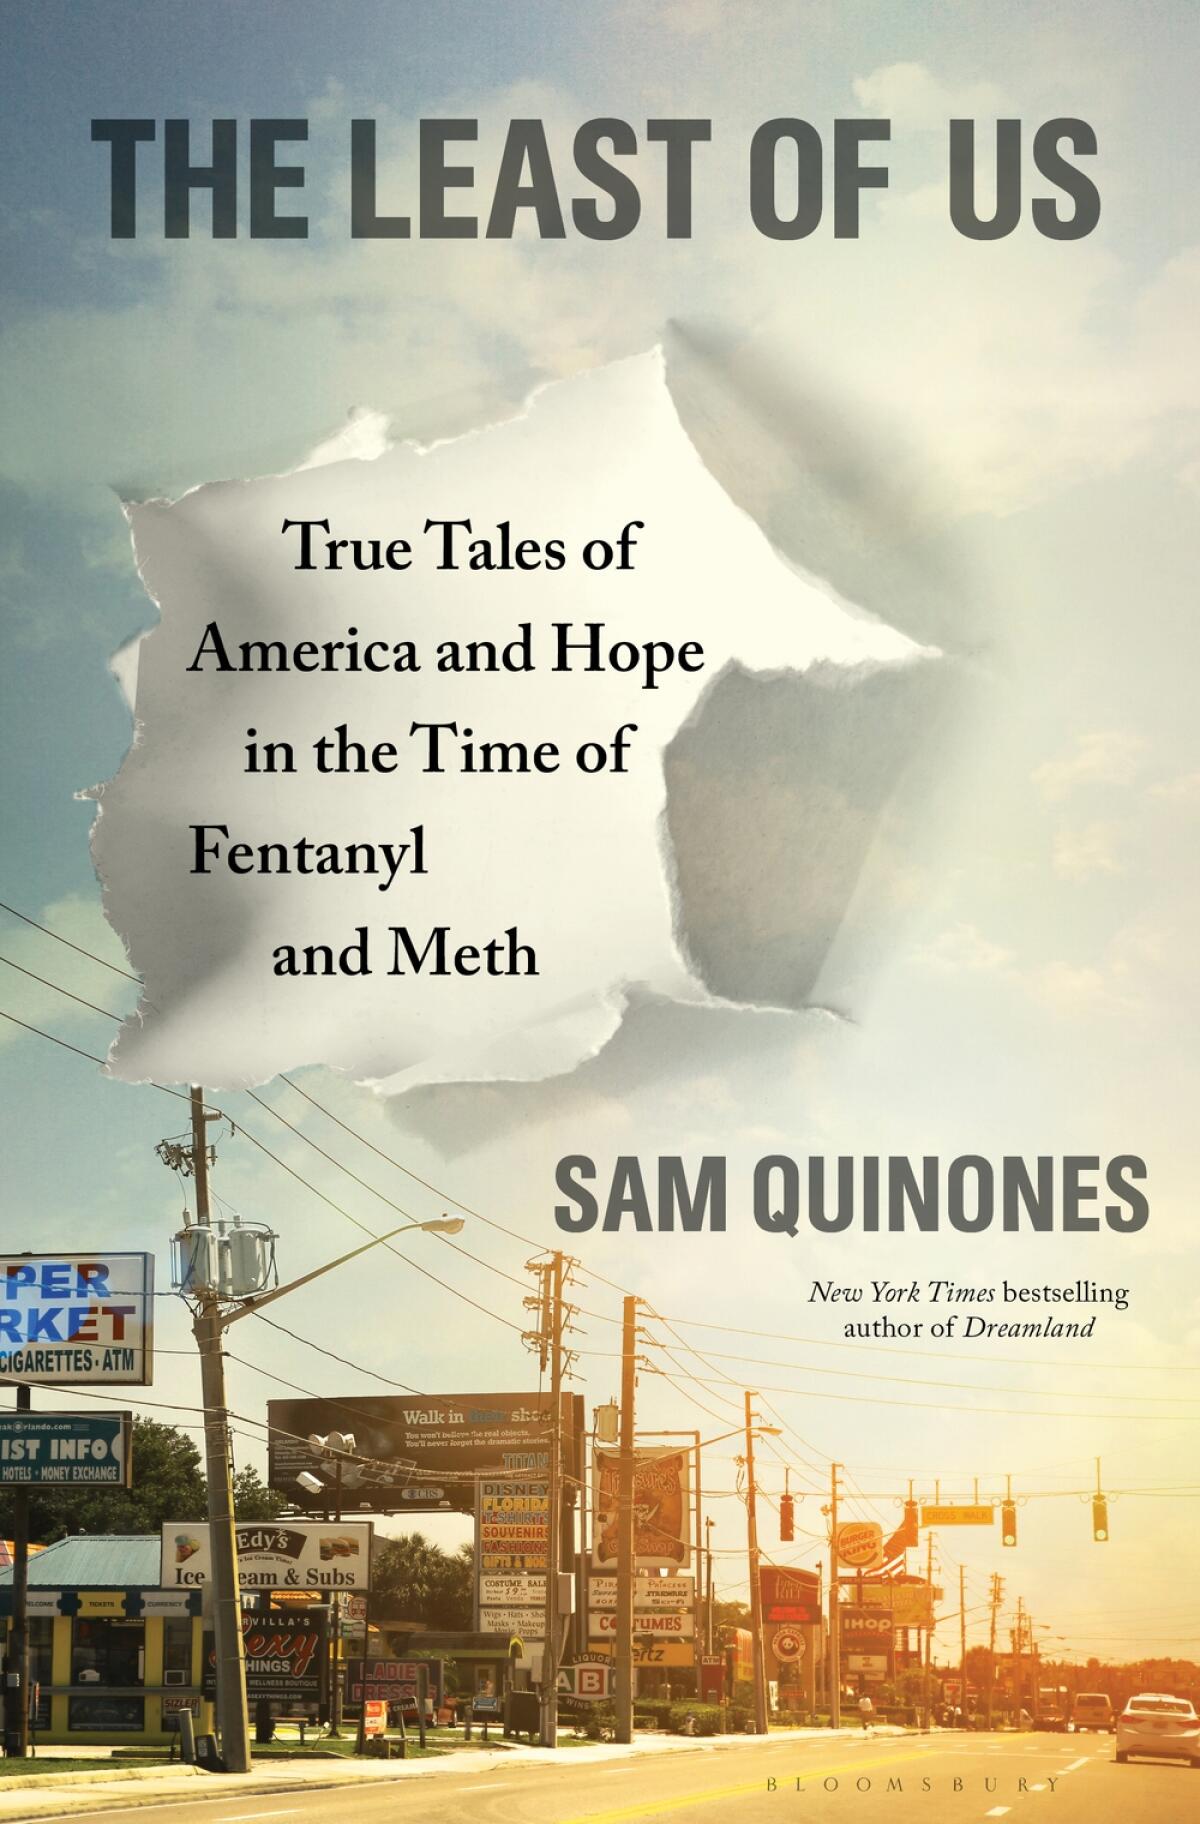 "The Least of Us" by Sam Quinones book cover